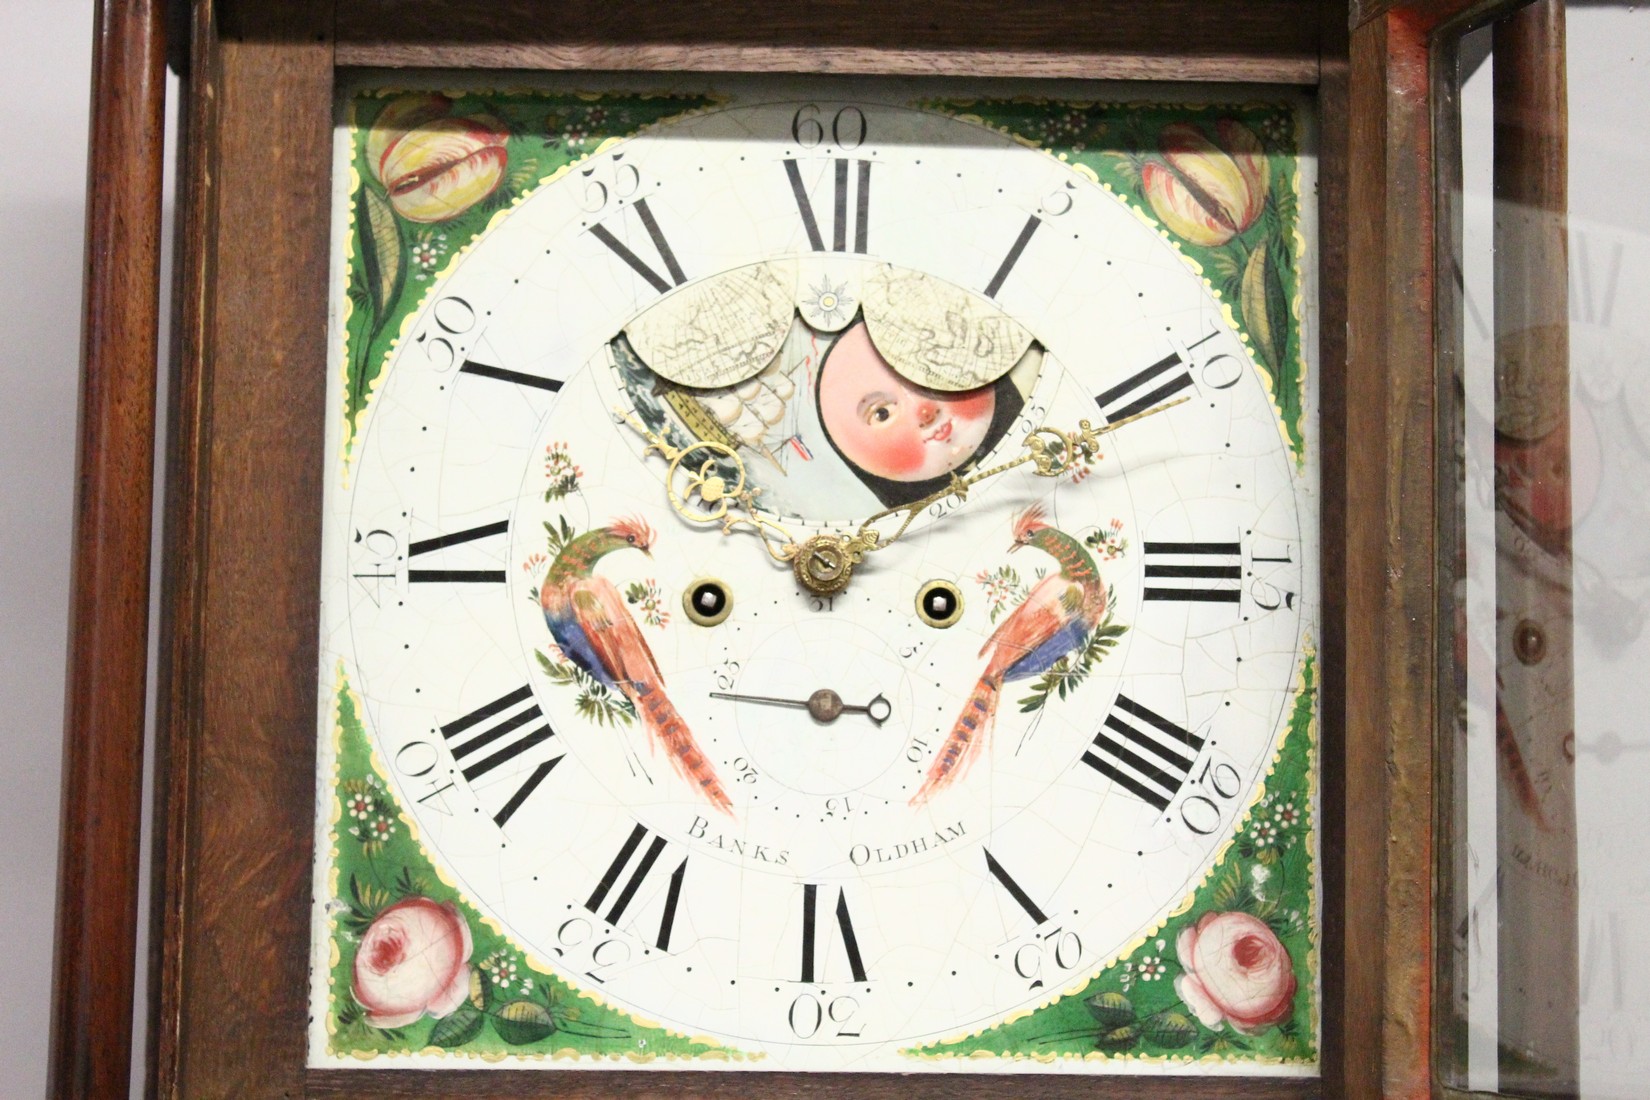 A GEORGE III MAHOGANY LONGCASE CLOCK BY BANKS, OLDHAM, with an eight day moonphase movement, - Image 5 of 9